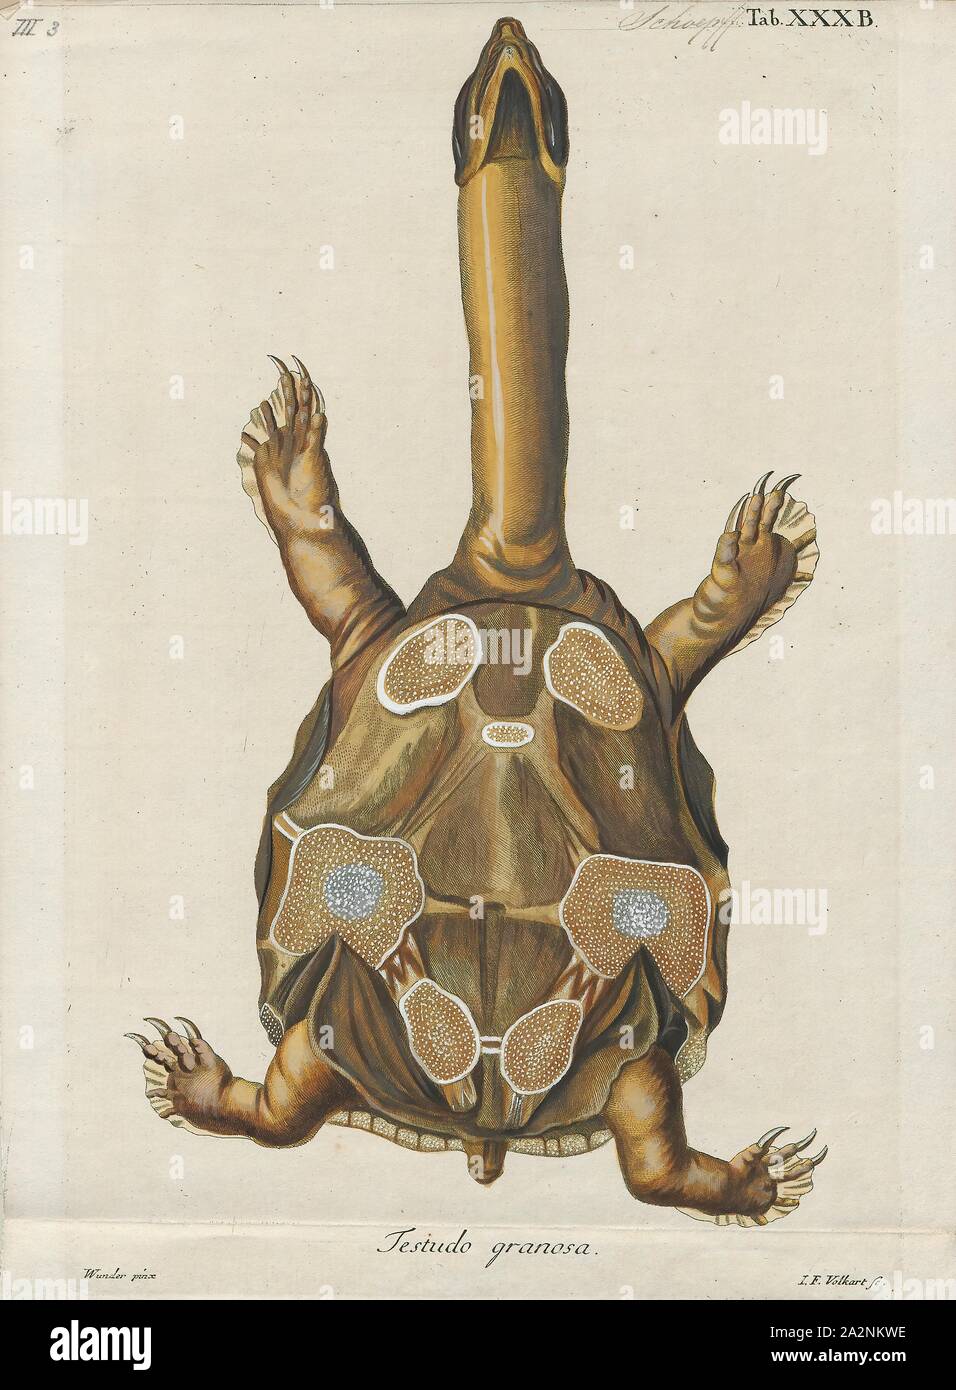 Testudo punctata, Print, The Indian flapshell turtle (Lissemys punctata) is a freshwater species of turtle found in South Asia. The “flap-shelled” name stems from the presence of femoral flaps located on the plastron. These flaps of skin cover the limbs when they retract into the shell. It is unclear what protection the flaps offer against predators. Indian flapshell turtles are widespread and common in the South Asian provinces., stomach side Stock Photo